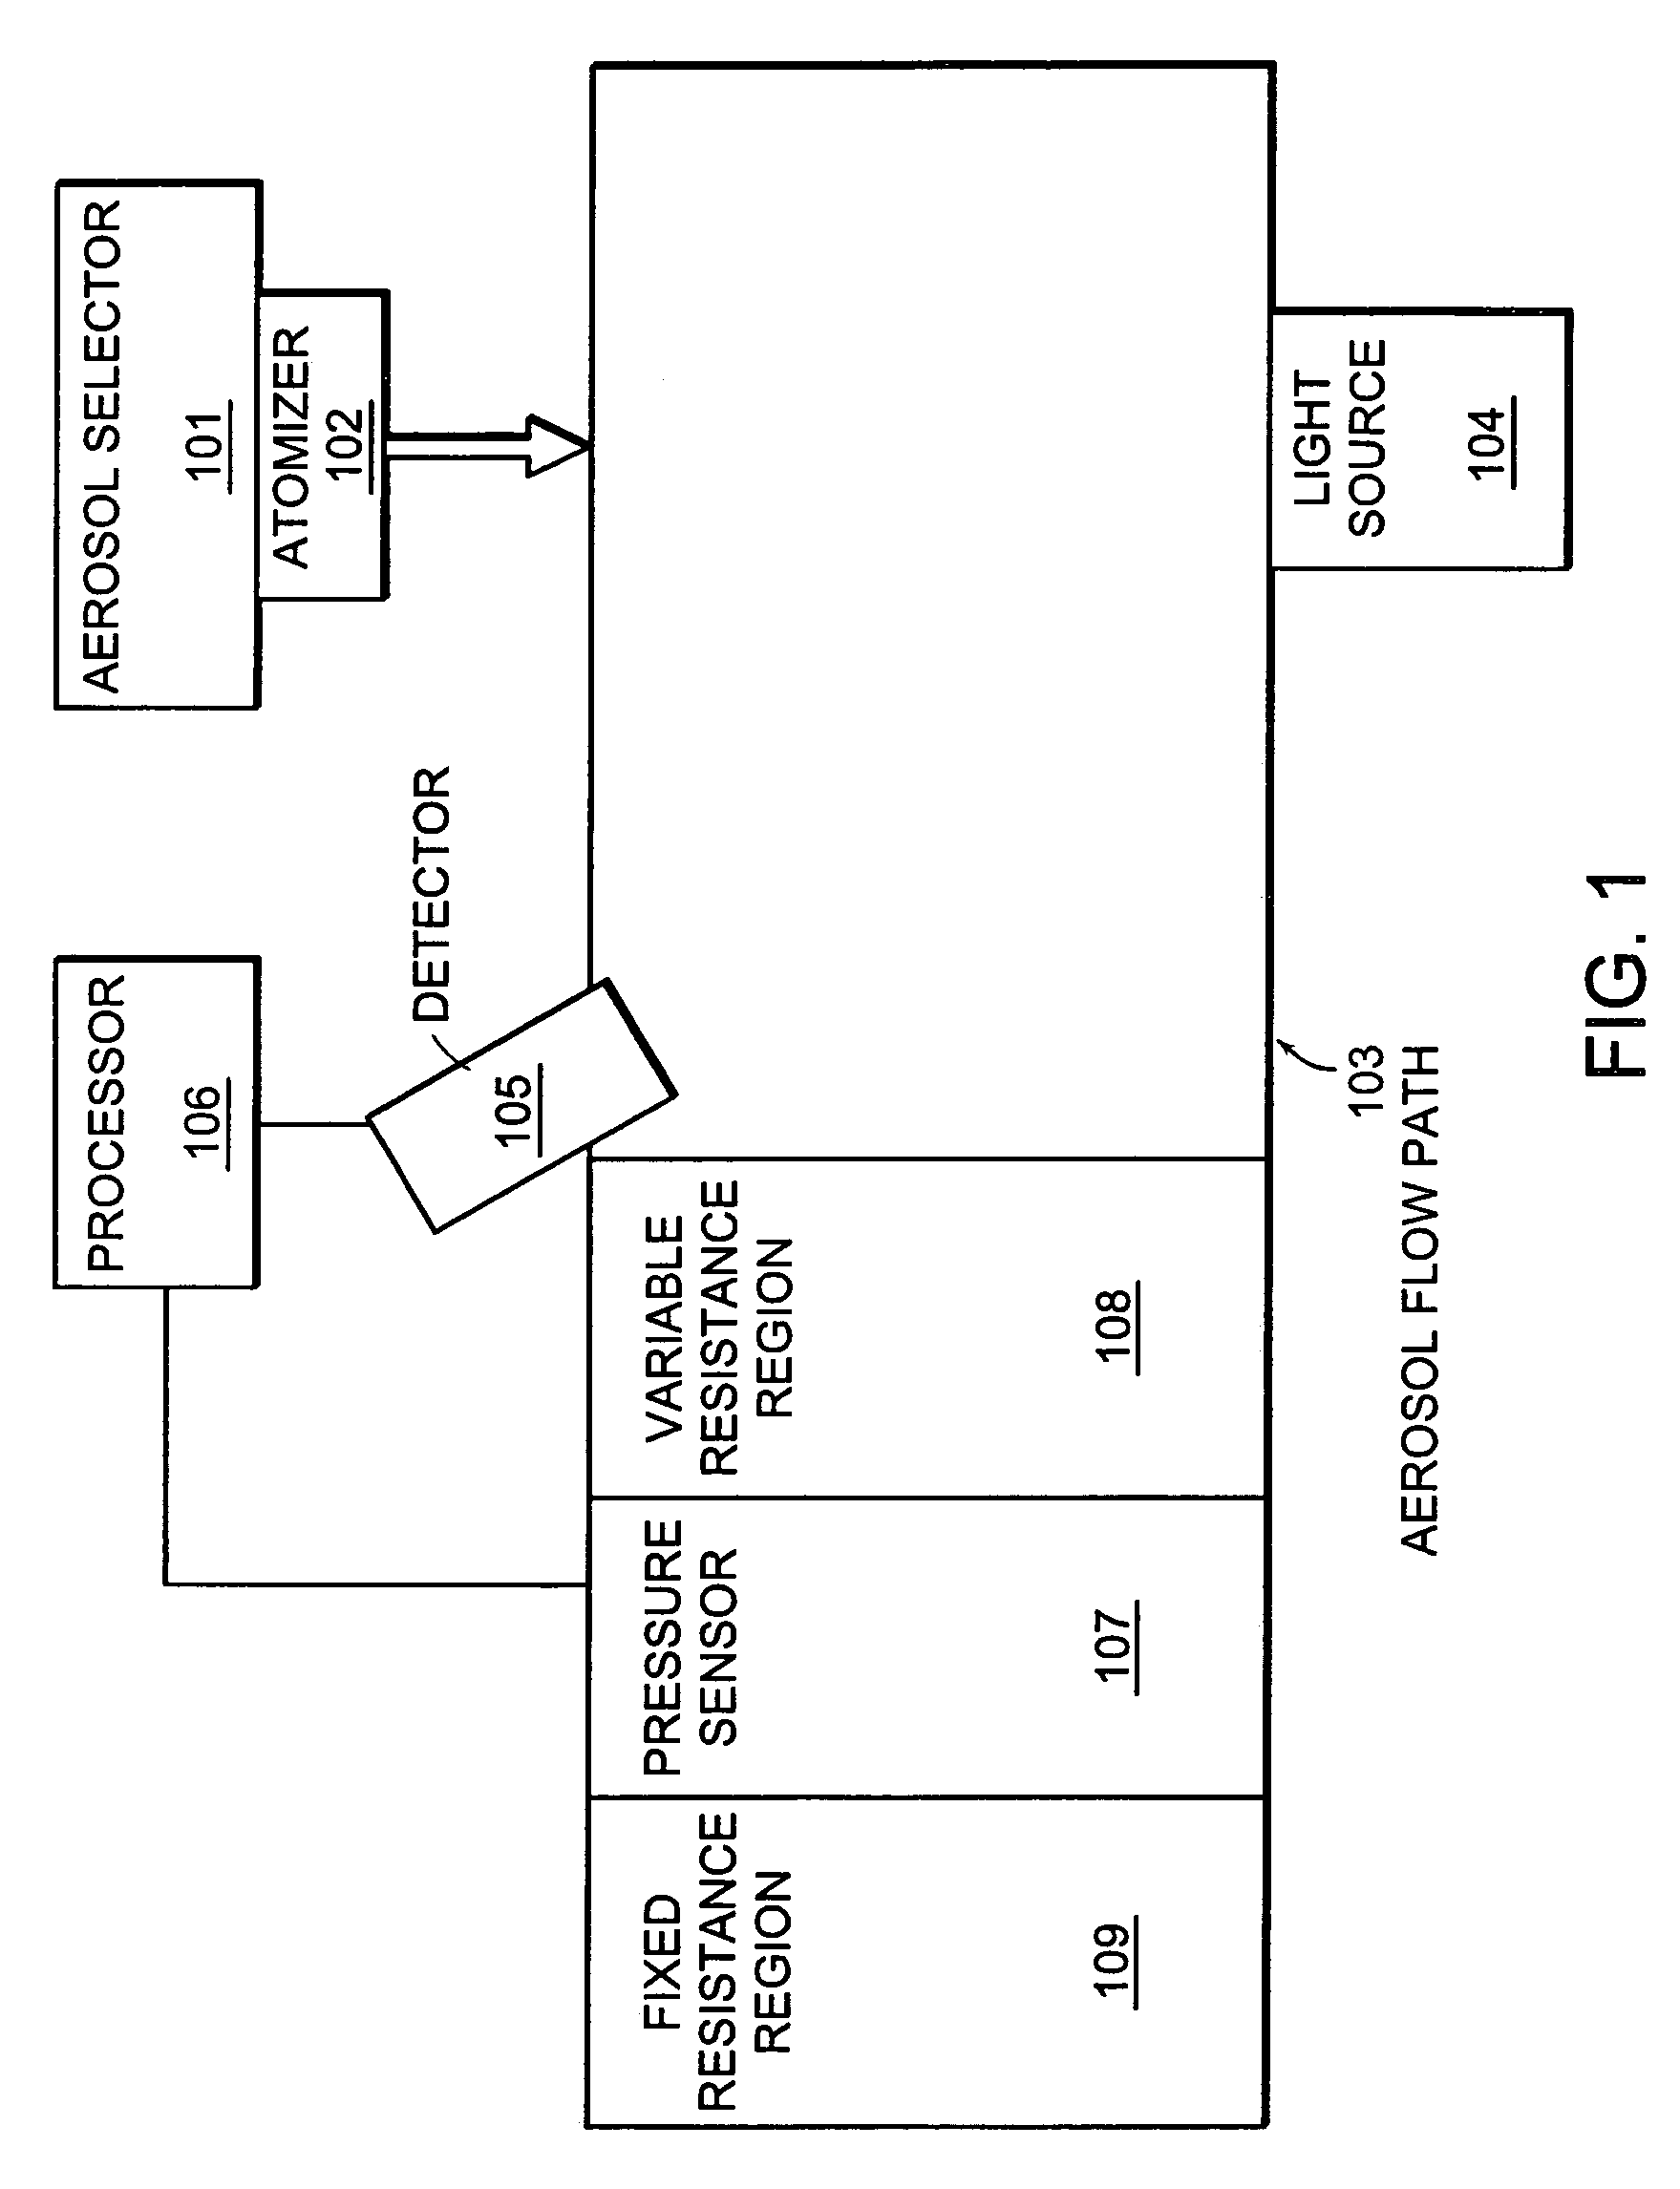 Detection system and method for aerosol delivery